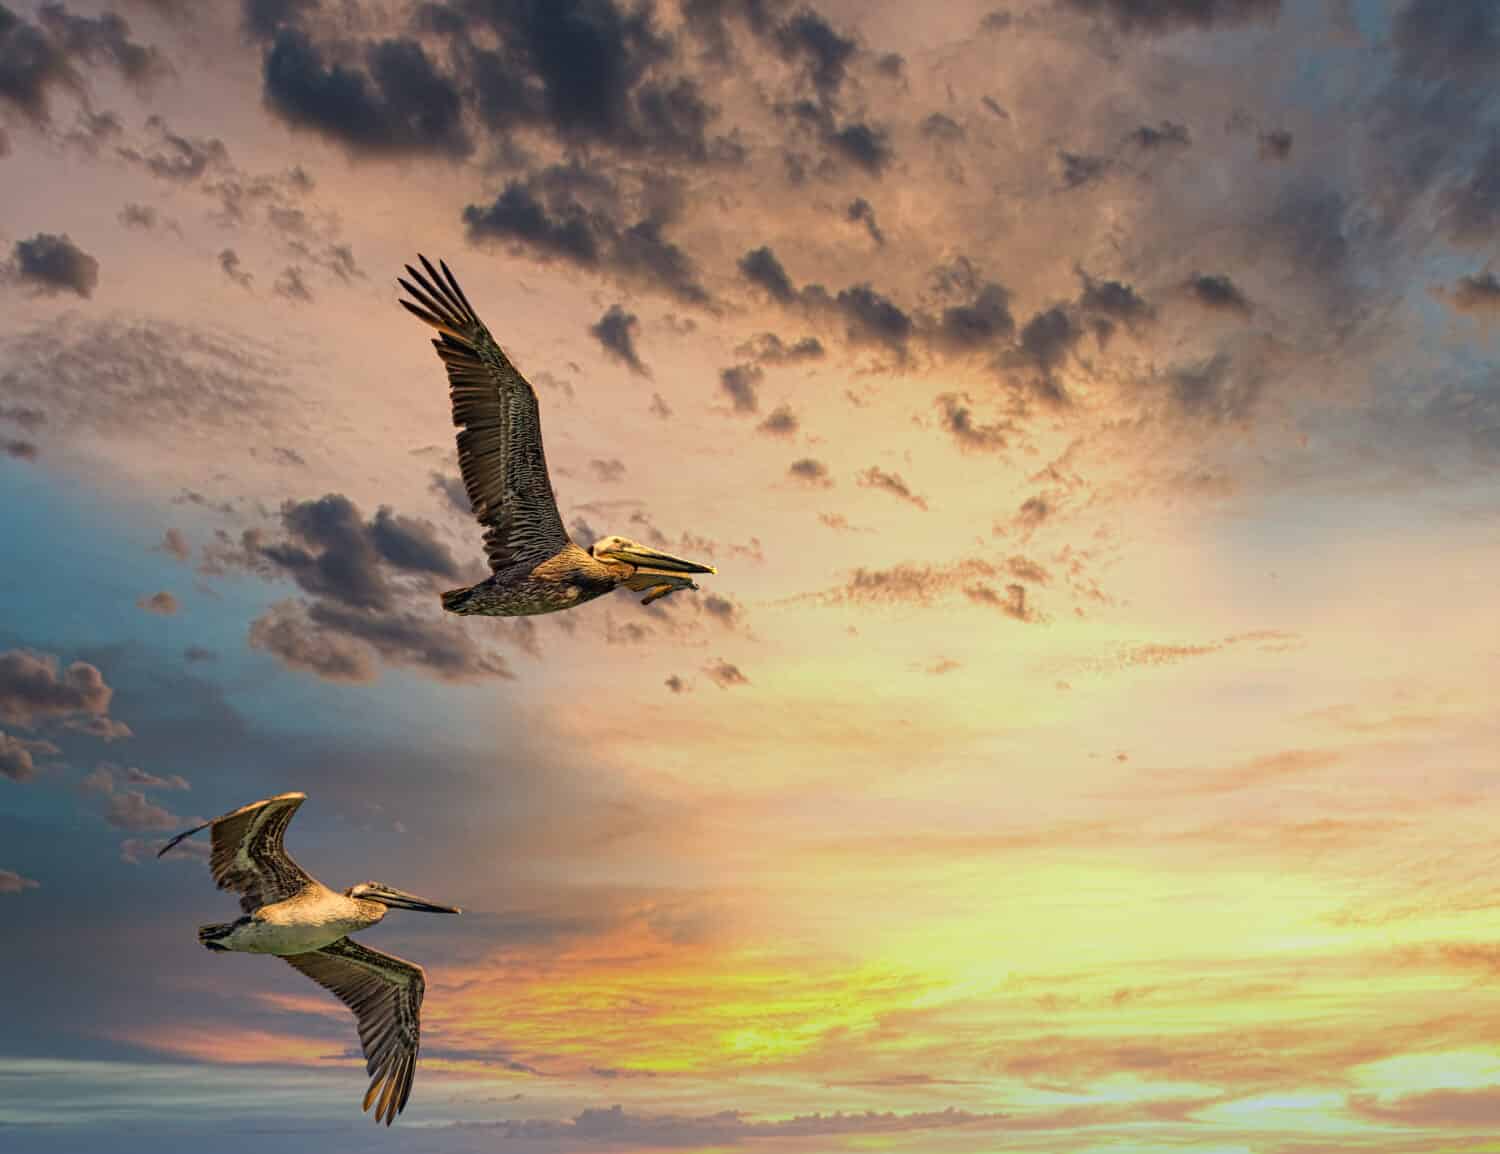 Brown pelicans in flight against a Two Pelicans in Flight at Sunset sky